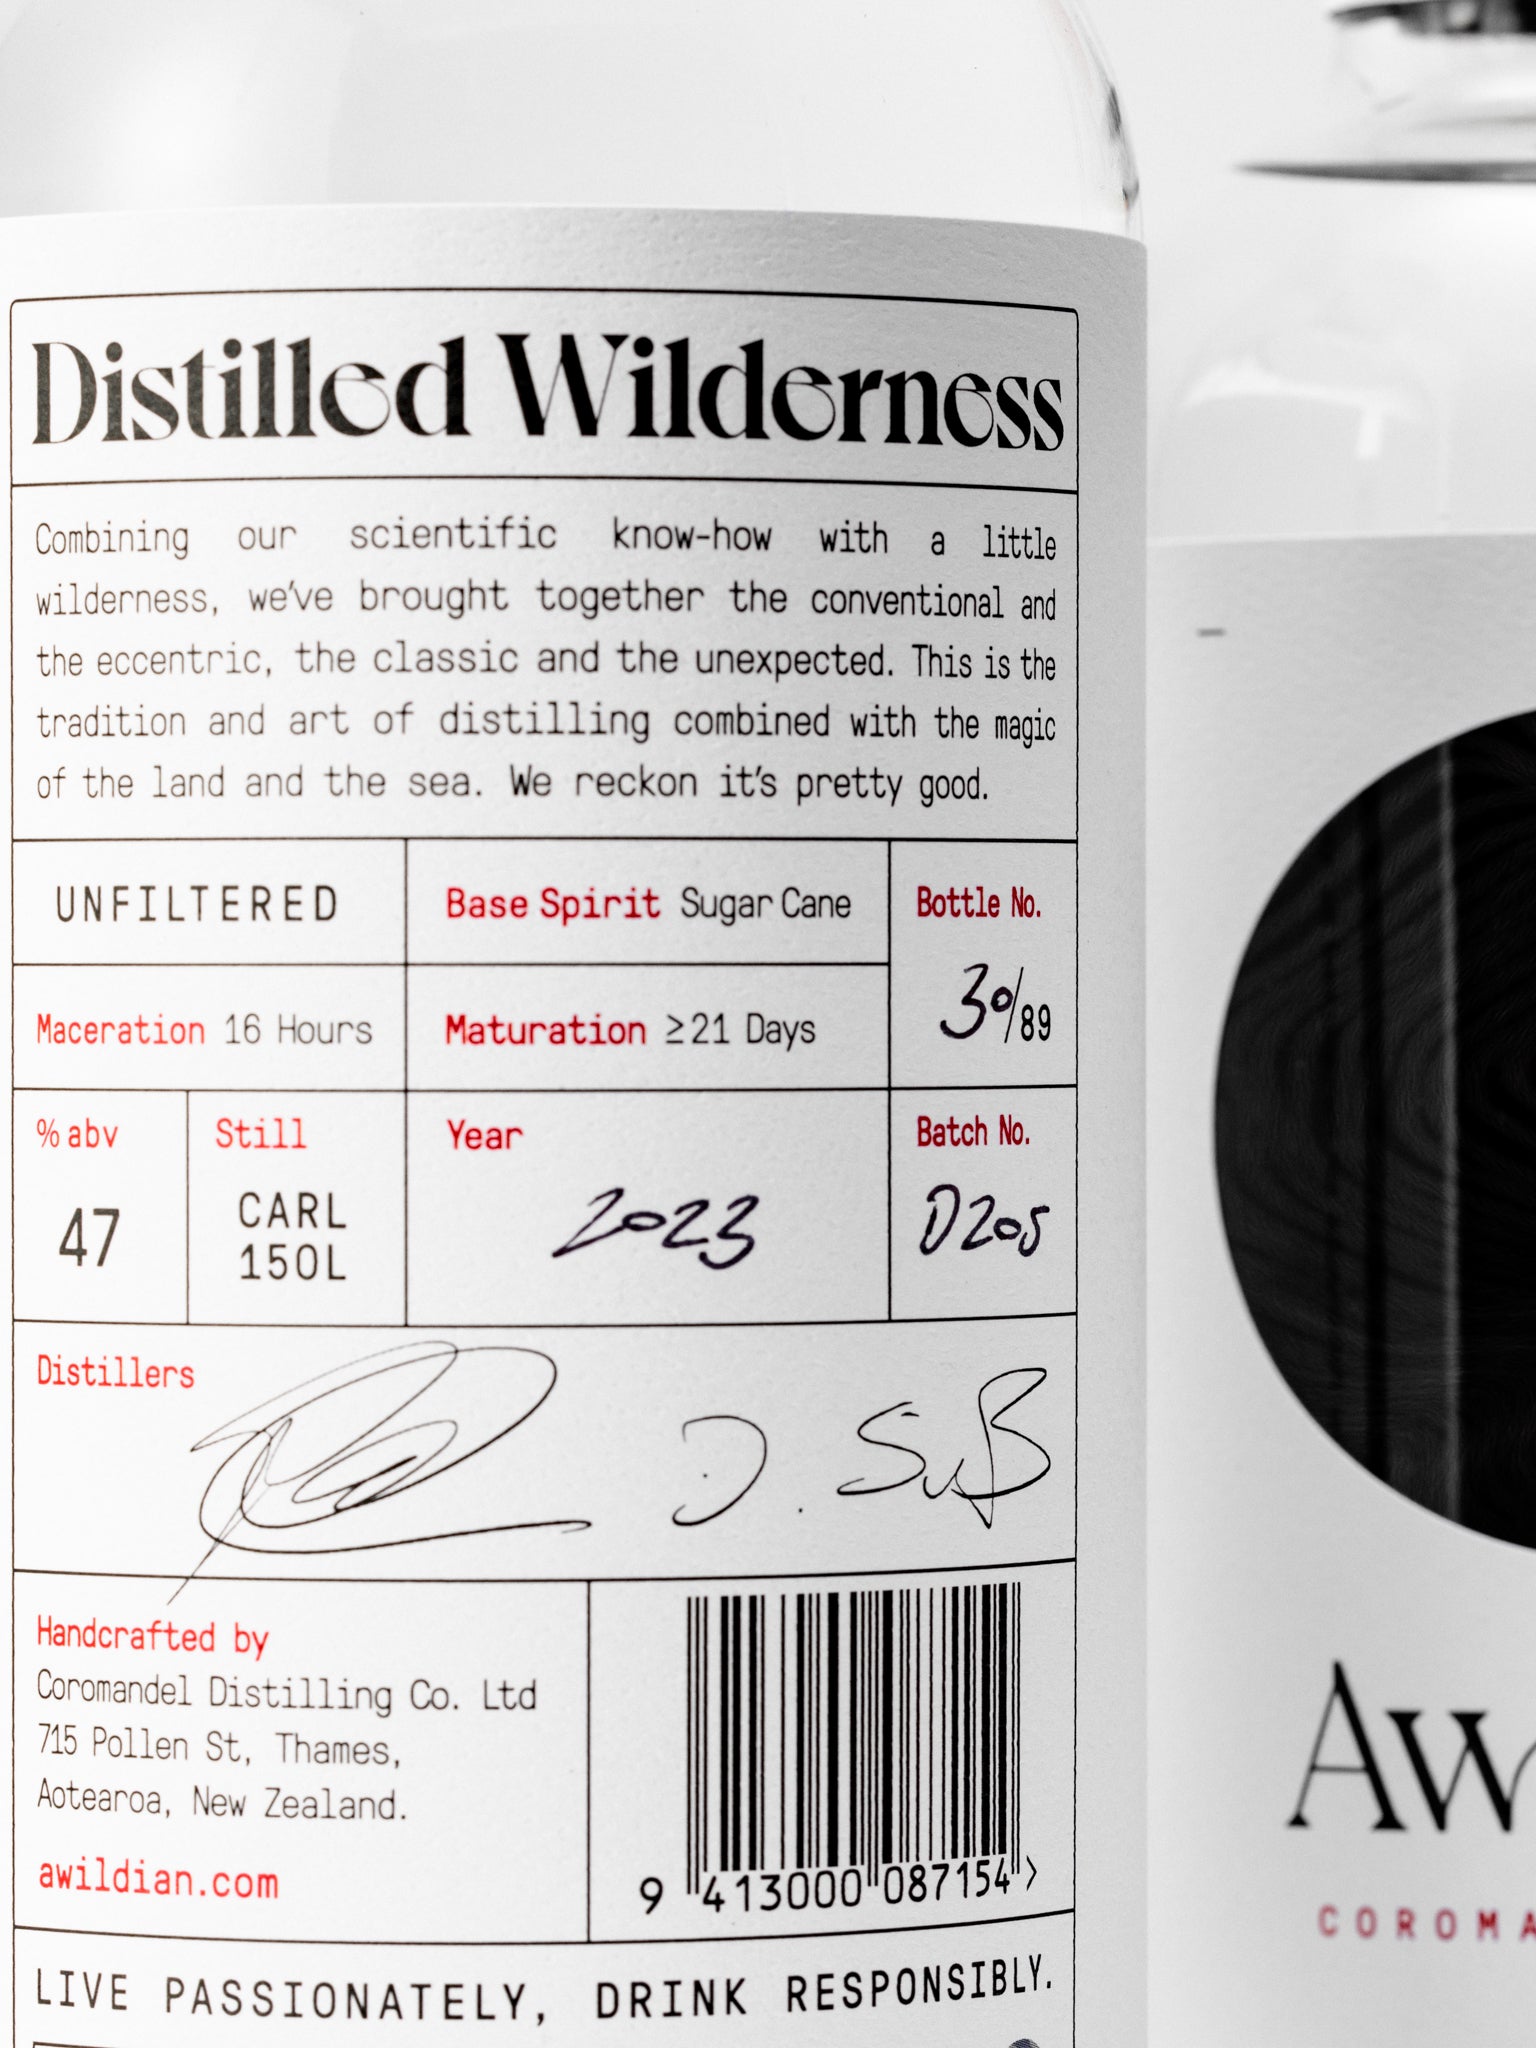 Awildian's 700ml dry gin bottle is a larger size for convenience